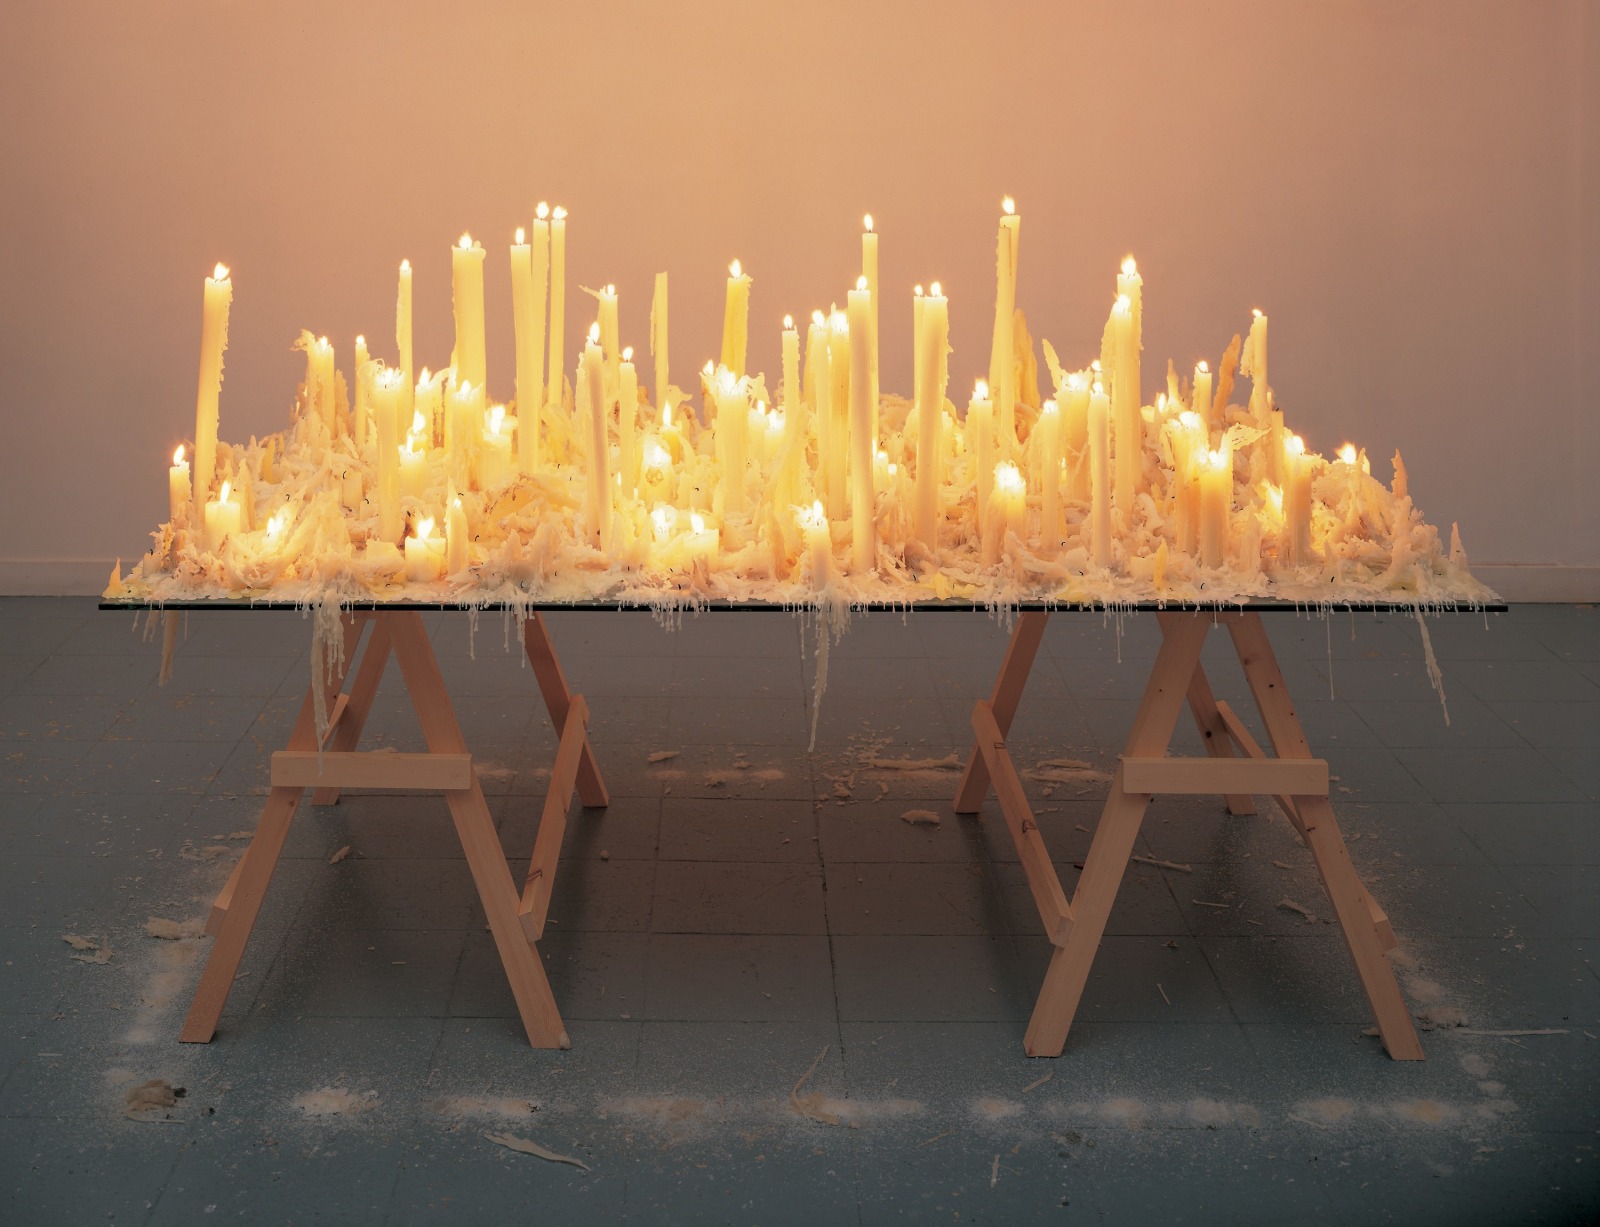 No Place Better Than This, 1996, Glass, wood and candles